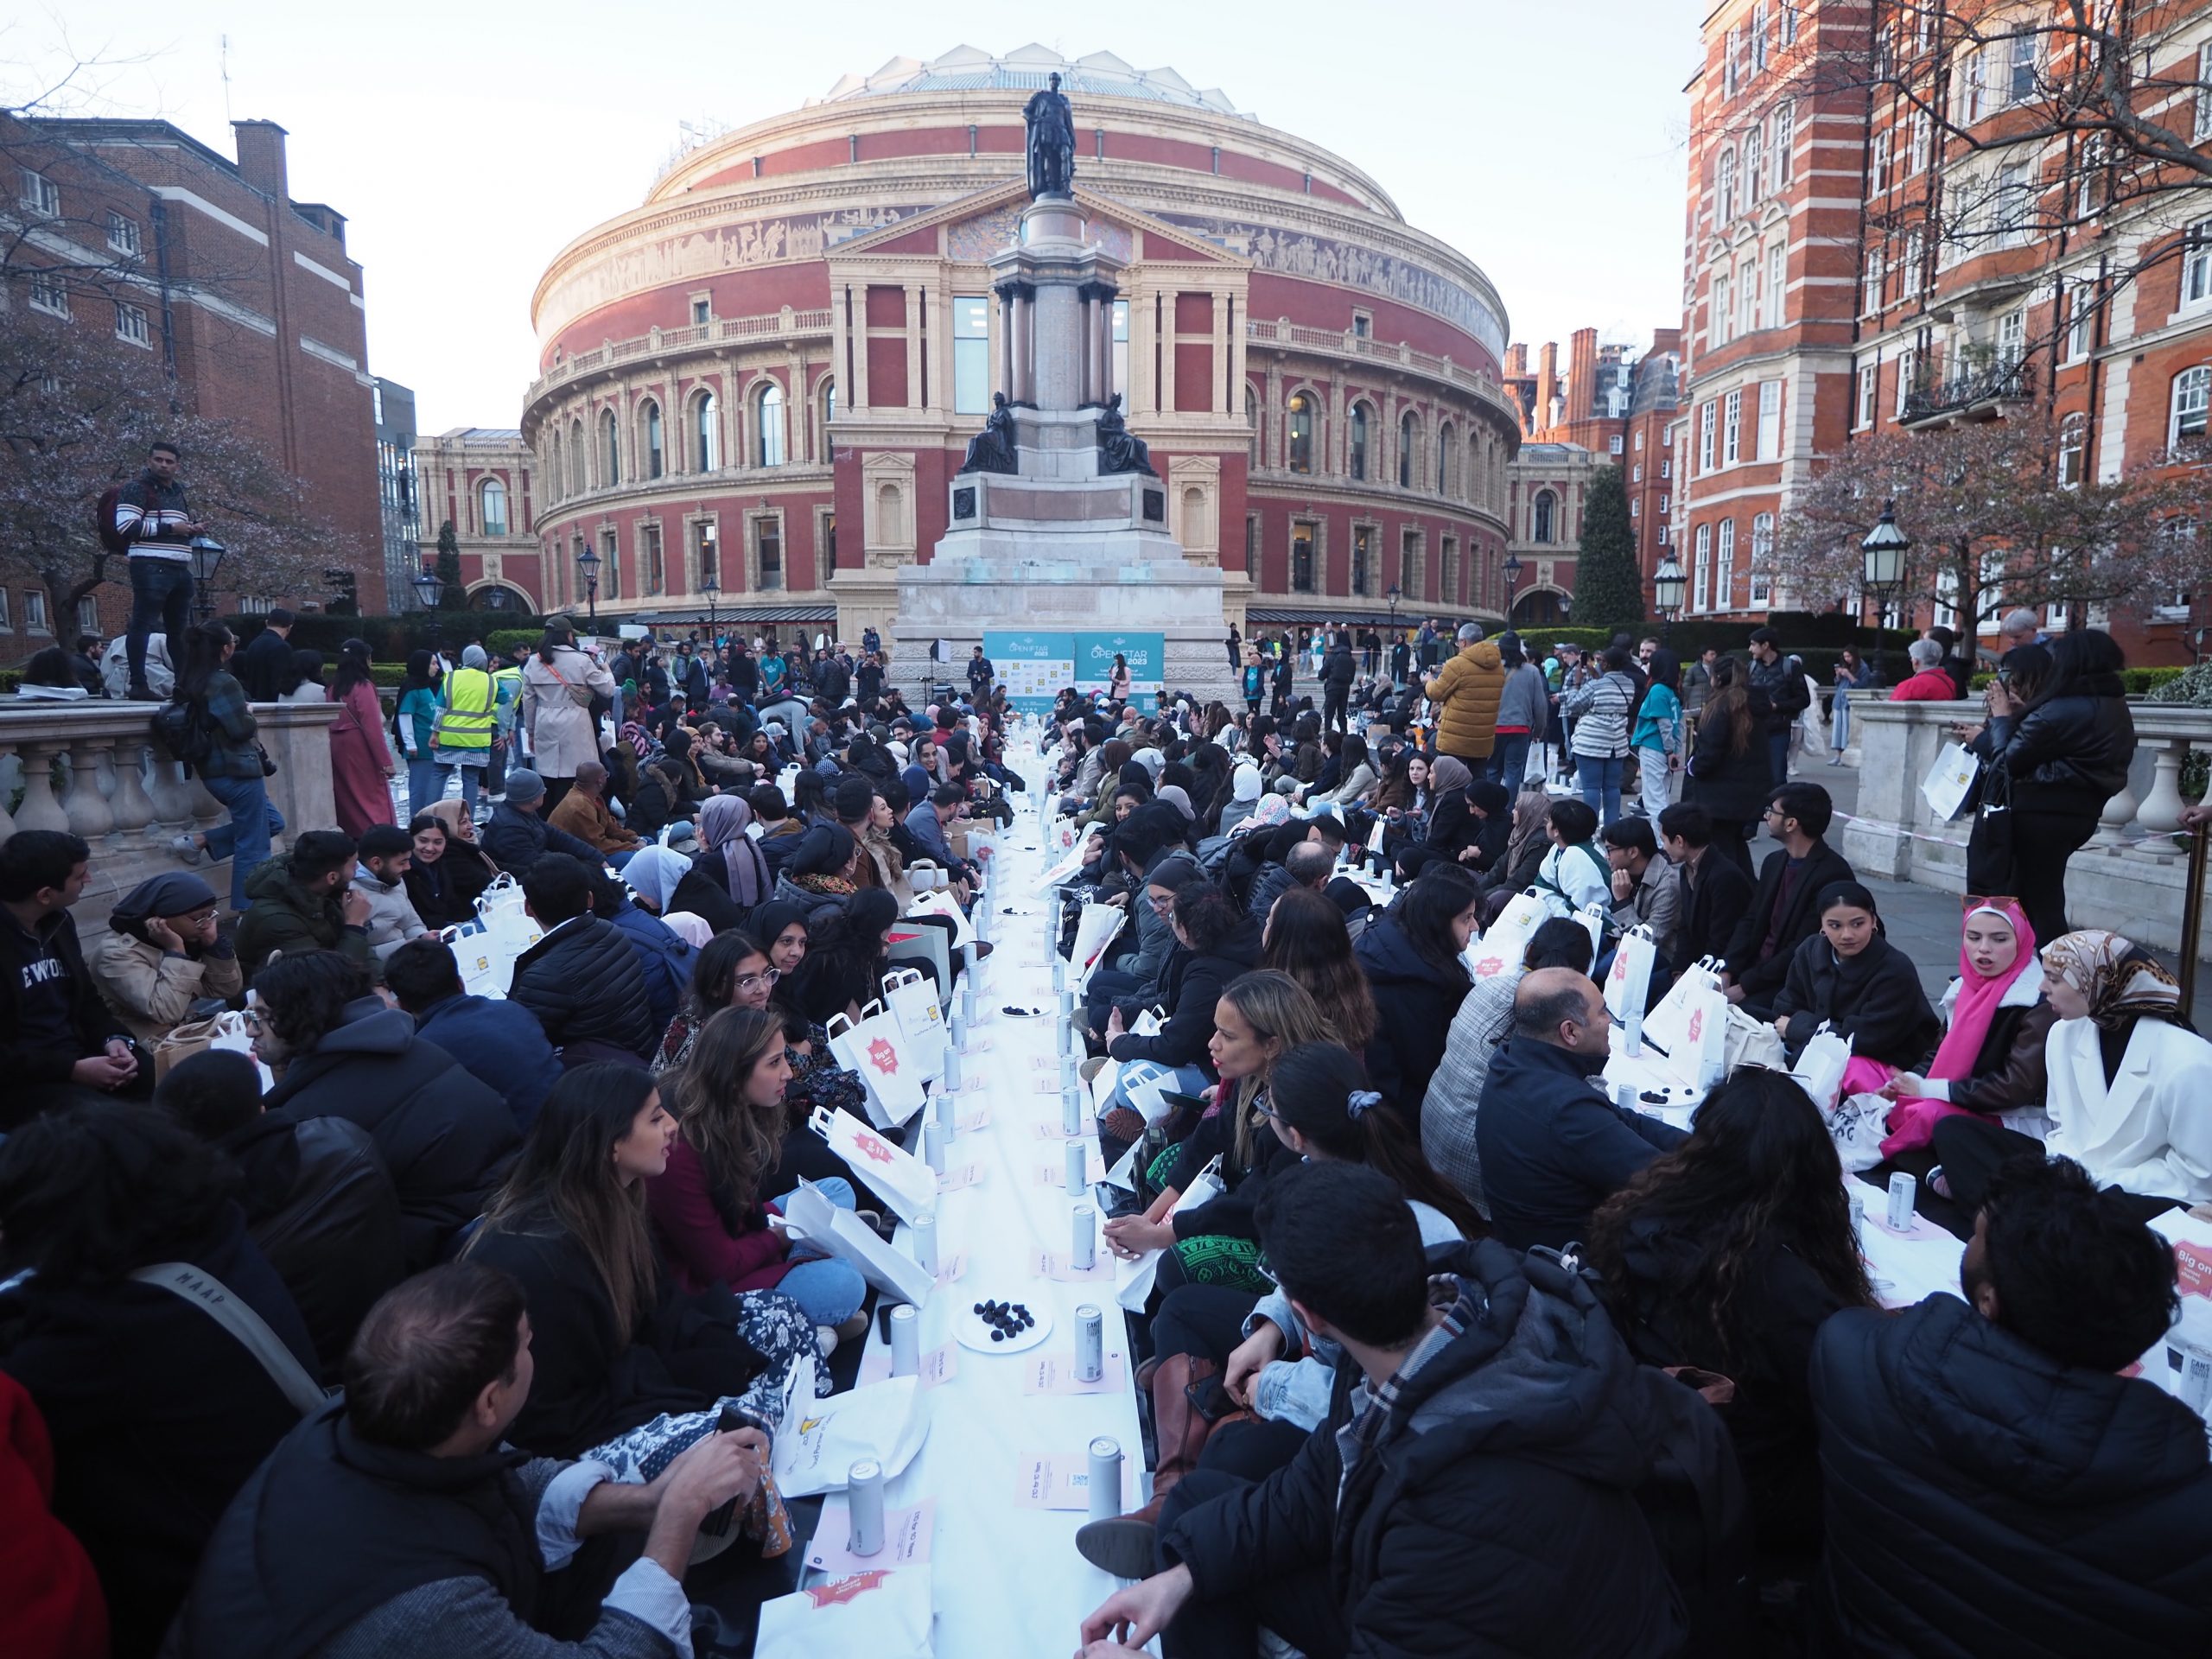 #OpenIftar at the Royal Albert Hall - About Islam